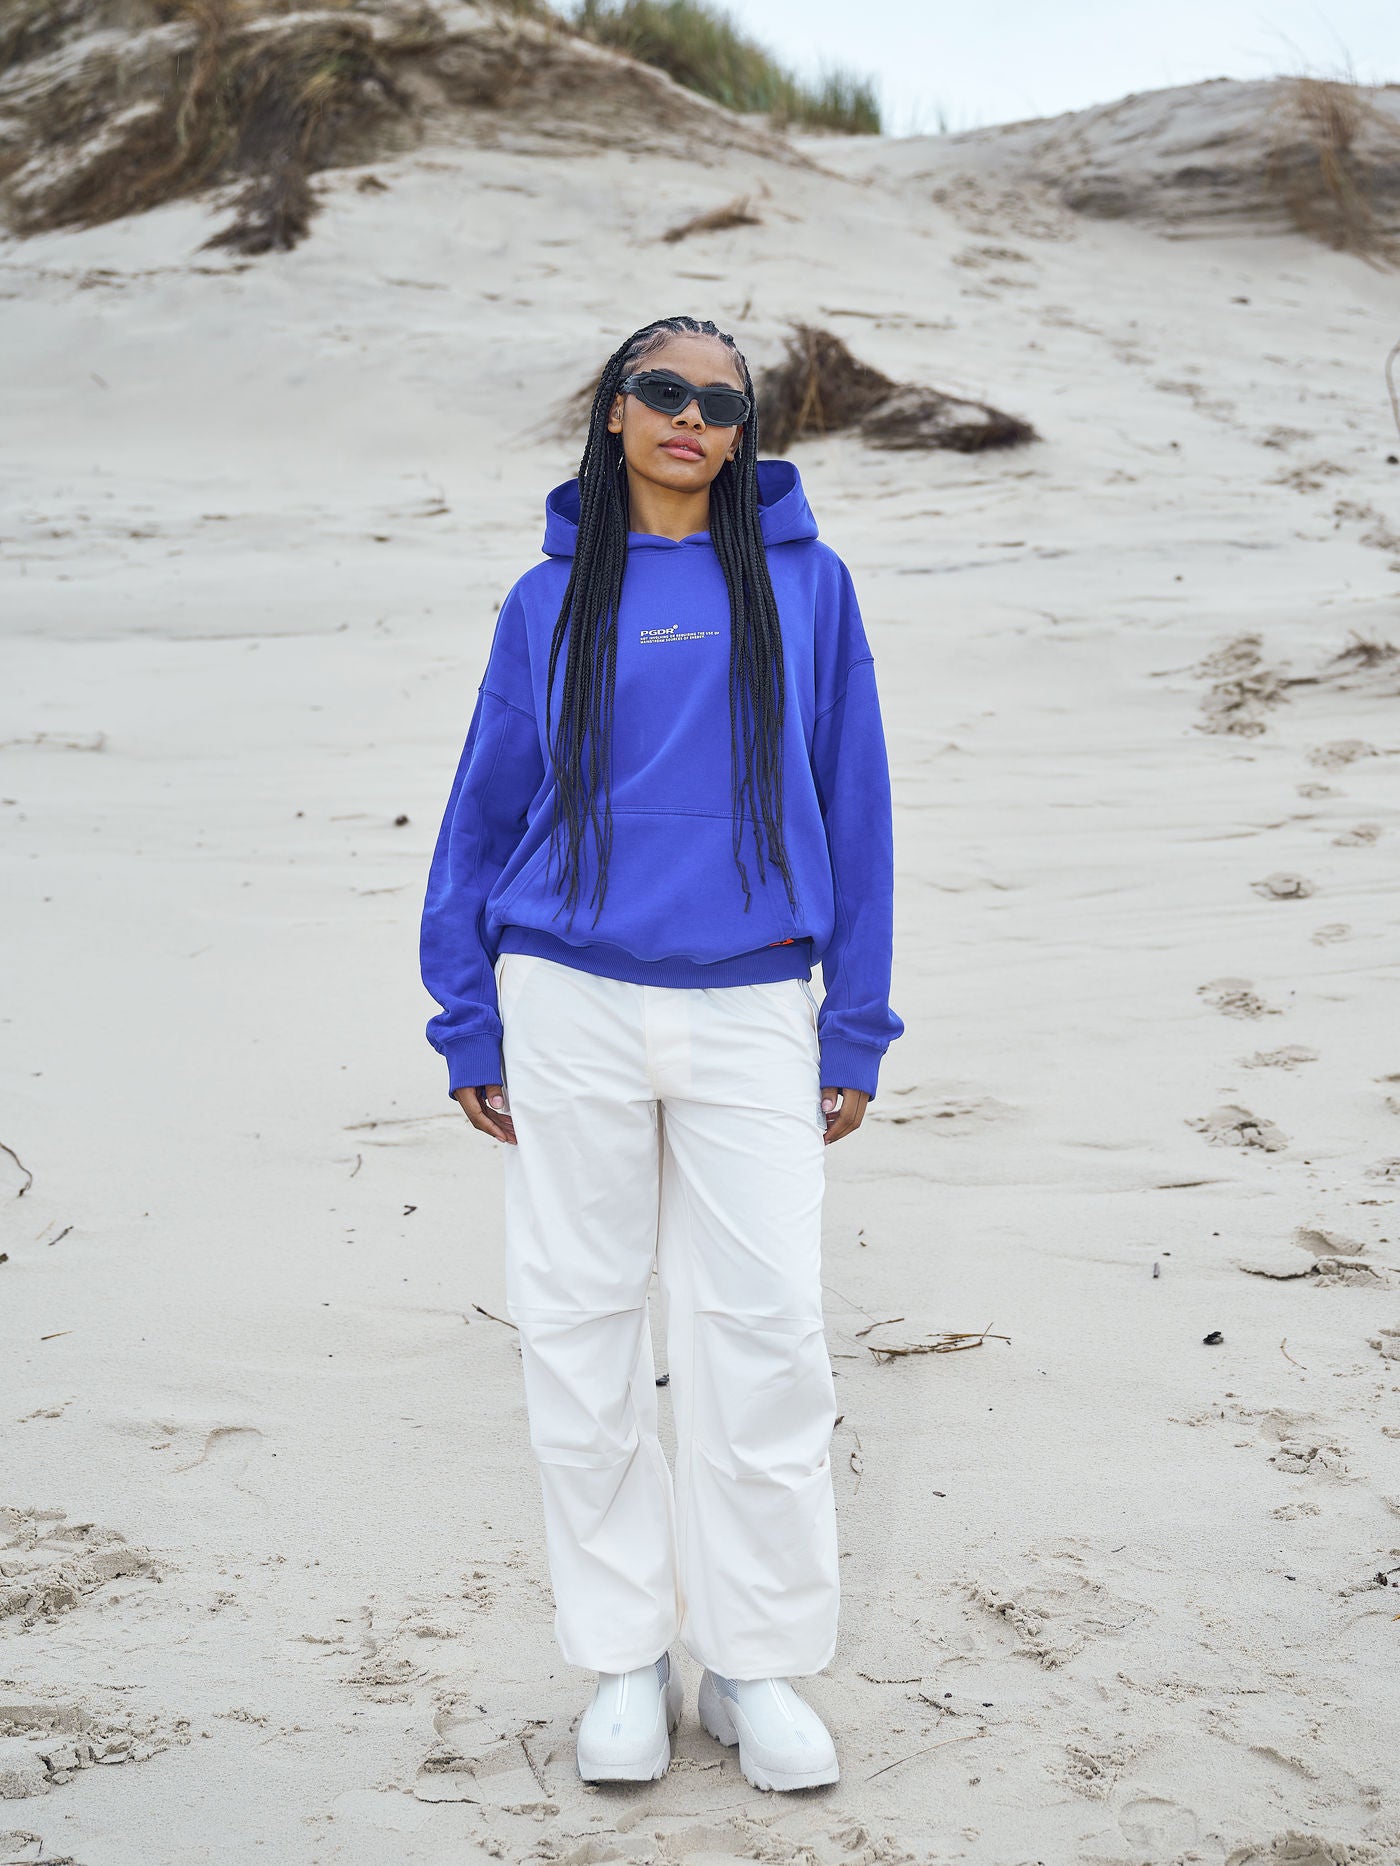 Navisk Oversized Hoodie Washed Endless Blue from the 'Do Not Disturb' collection, designed for comfort and relaxation, set against a serene background, symbolizing a break from the fast-paced world.